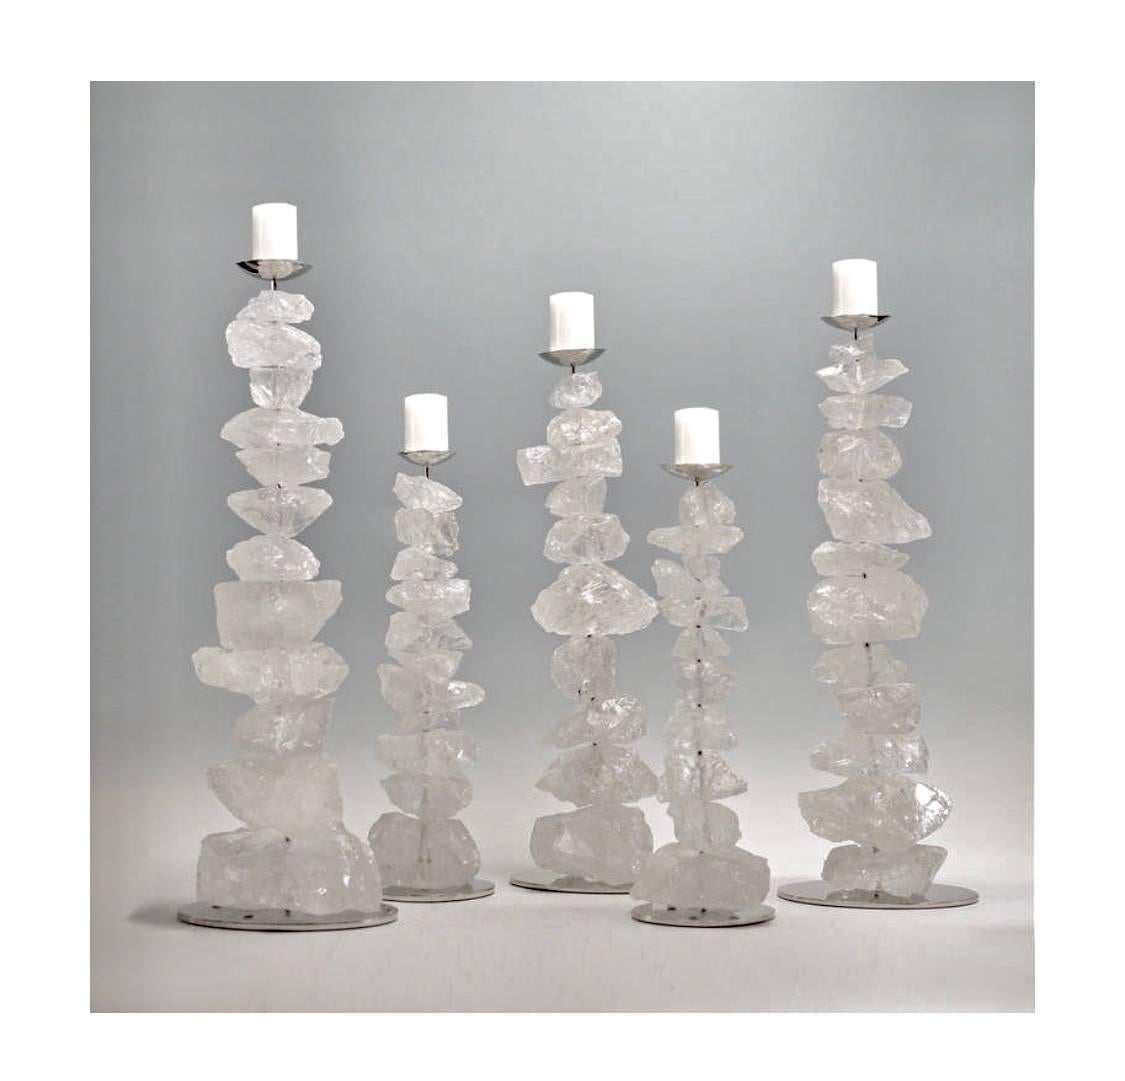 The natural stack of rock crystals mounted as candleholders with nickel-plated stands;
Size available in 17